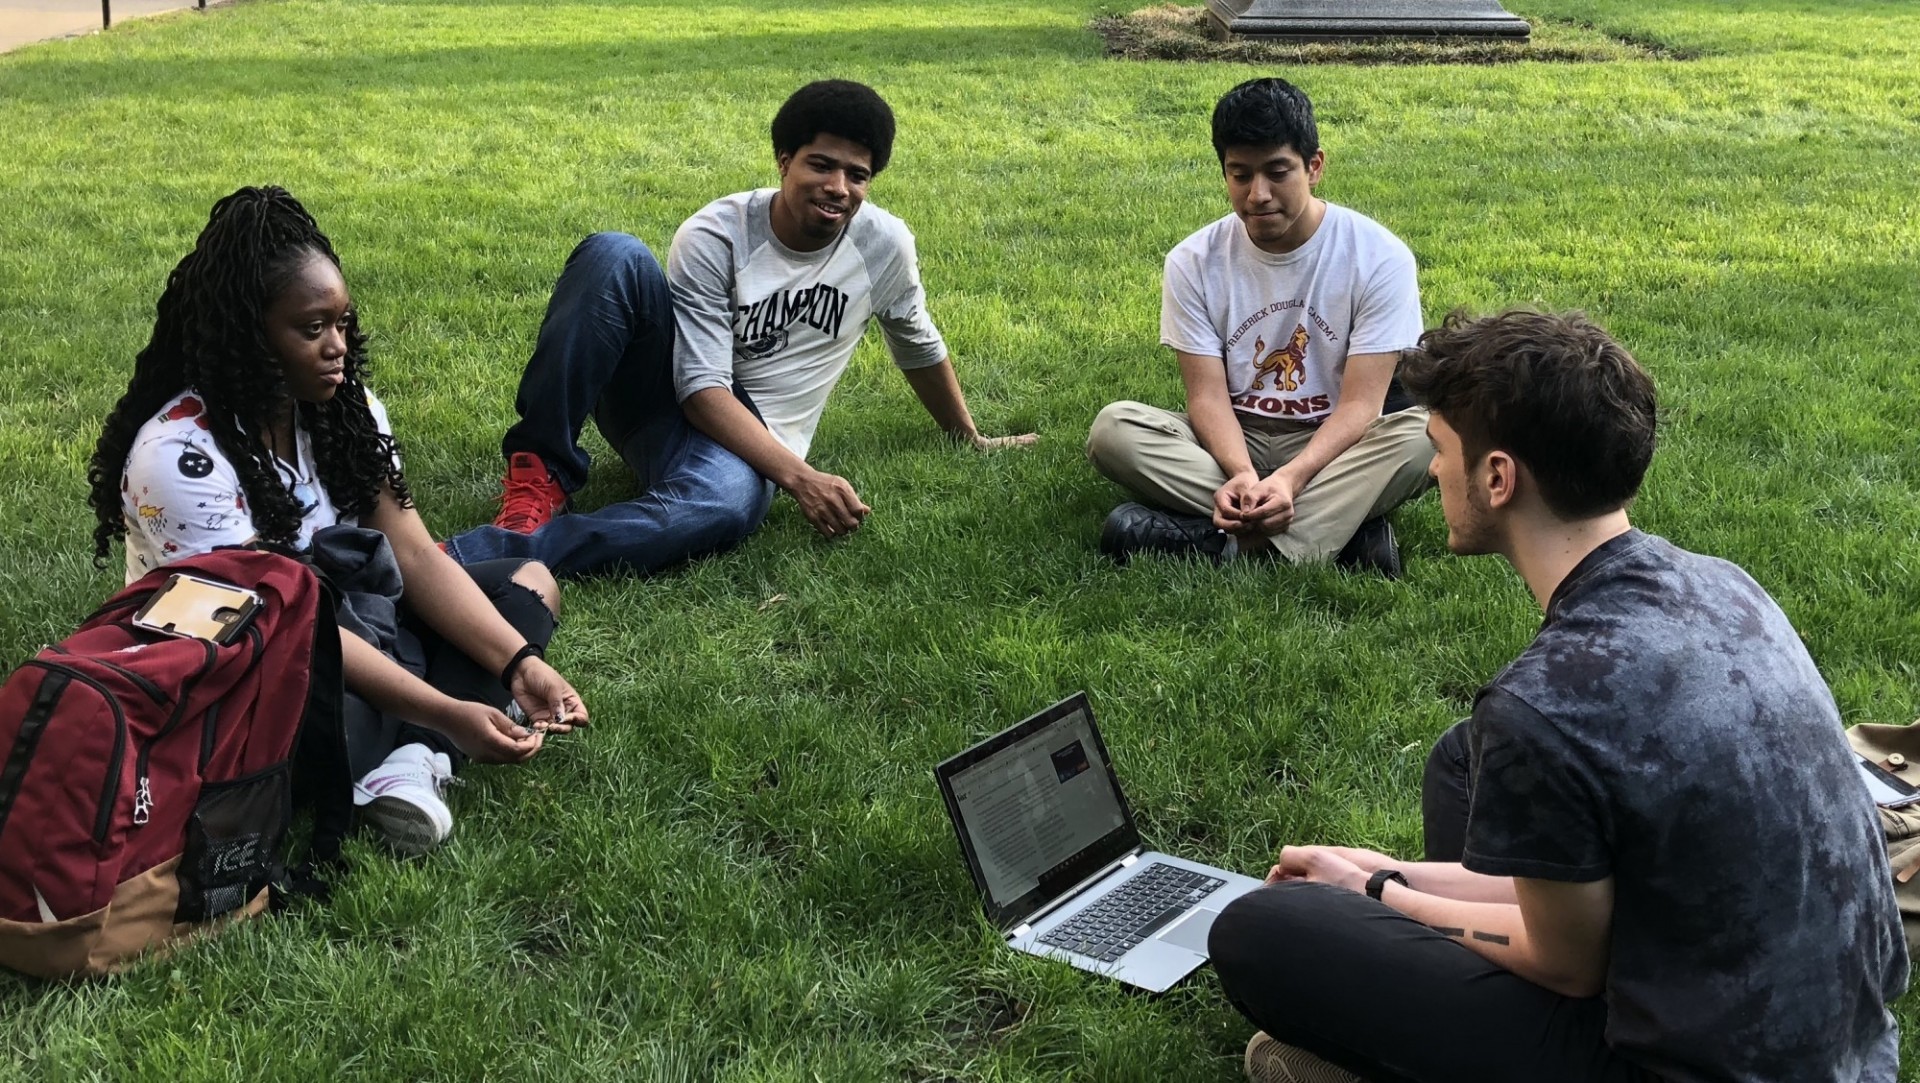 Four students sitting on the grass, talking